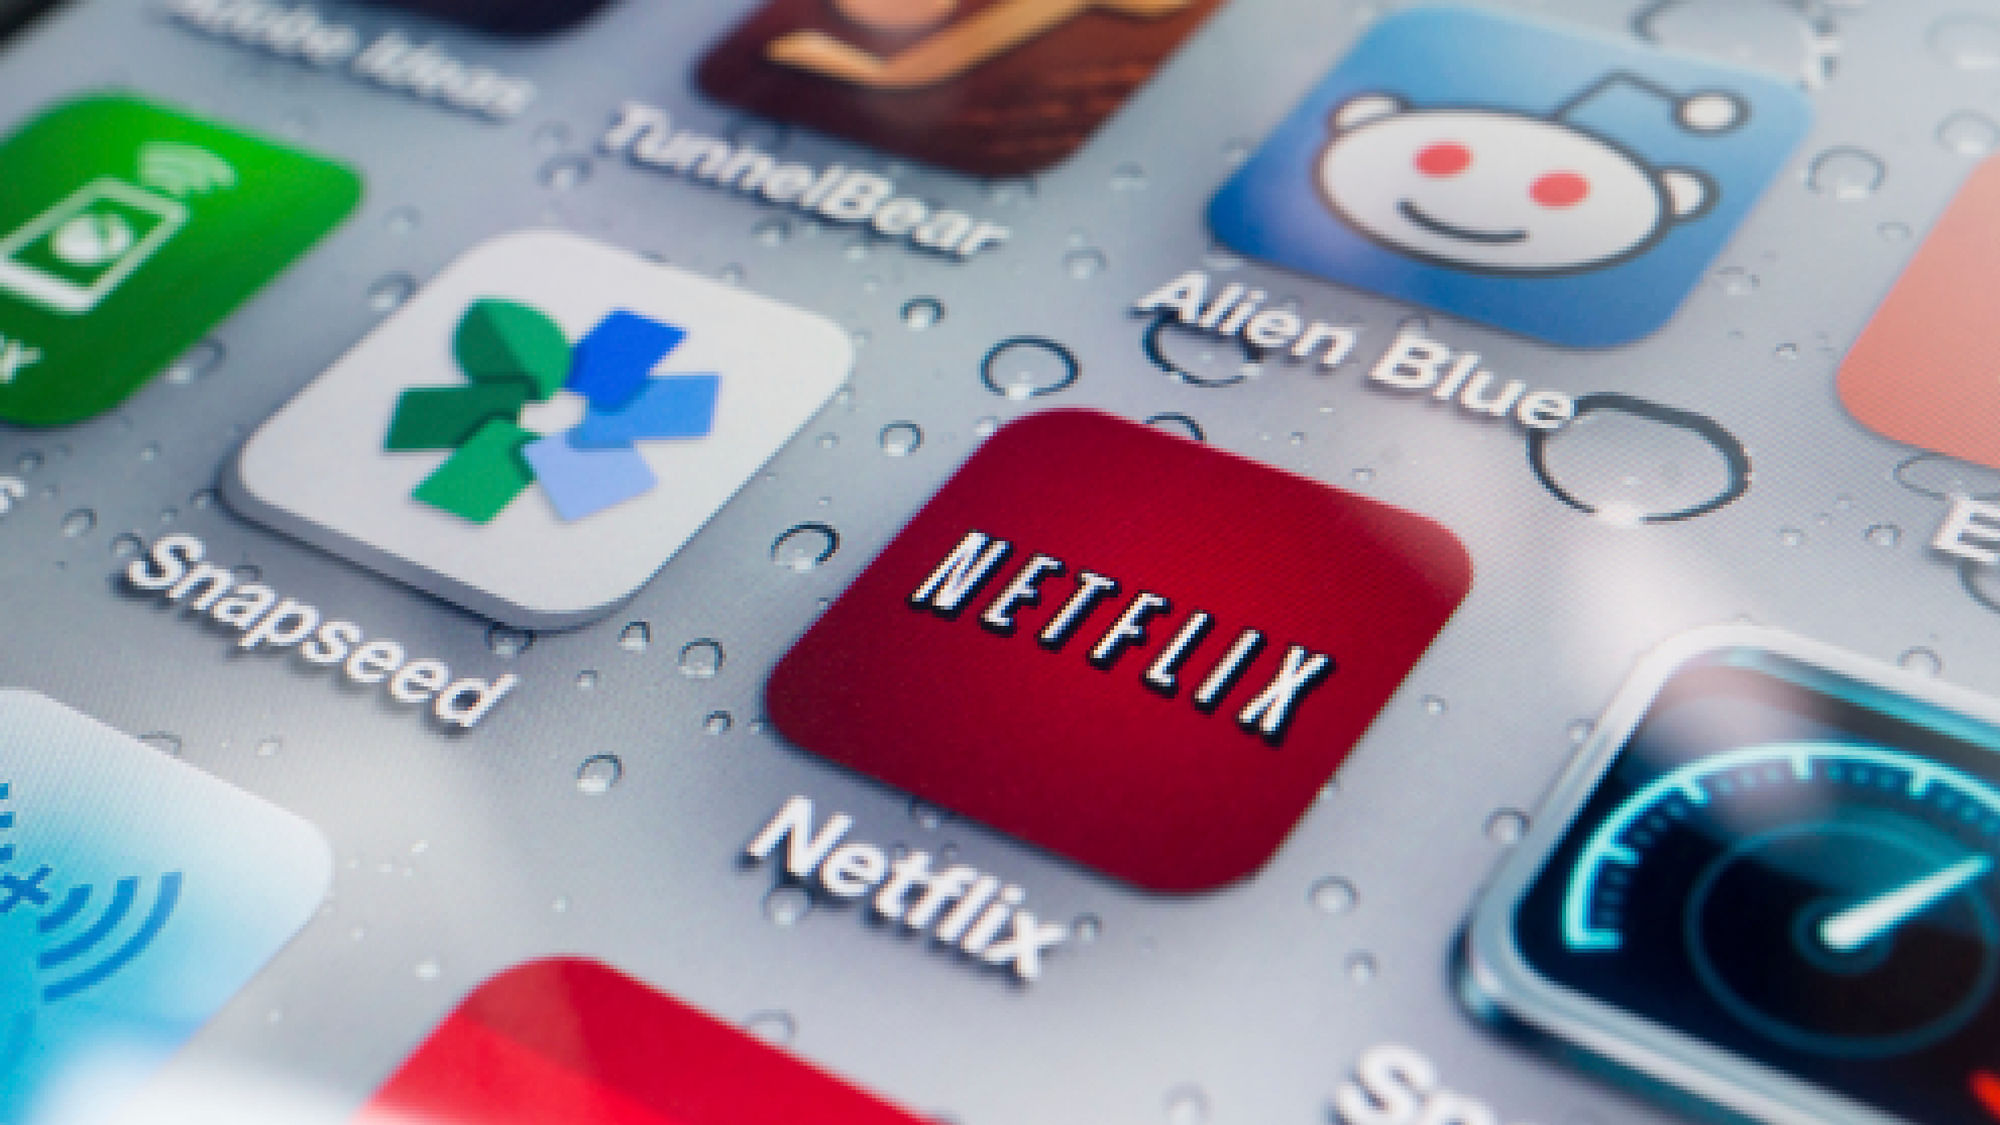 Netflix is now available in India and 129 countries. (Photo: iStockphoto)